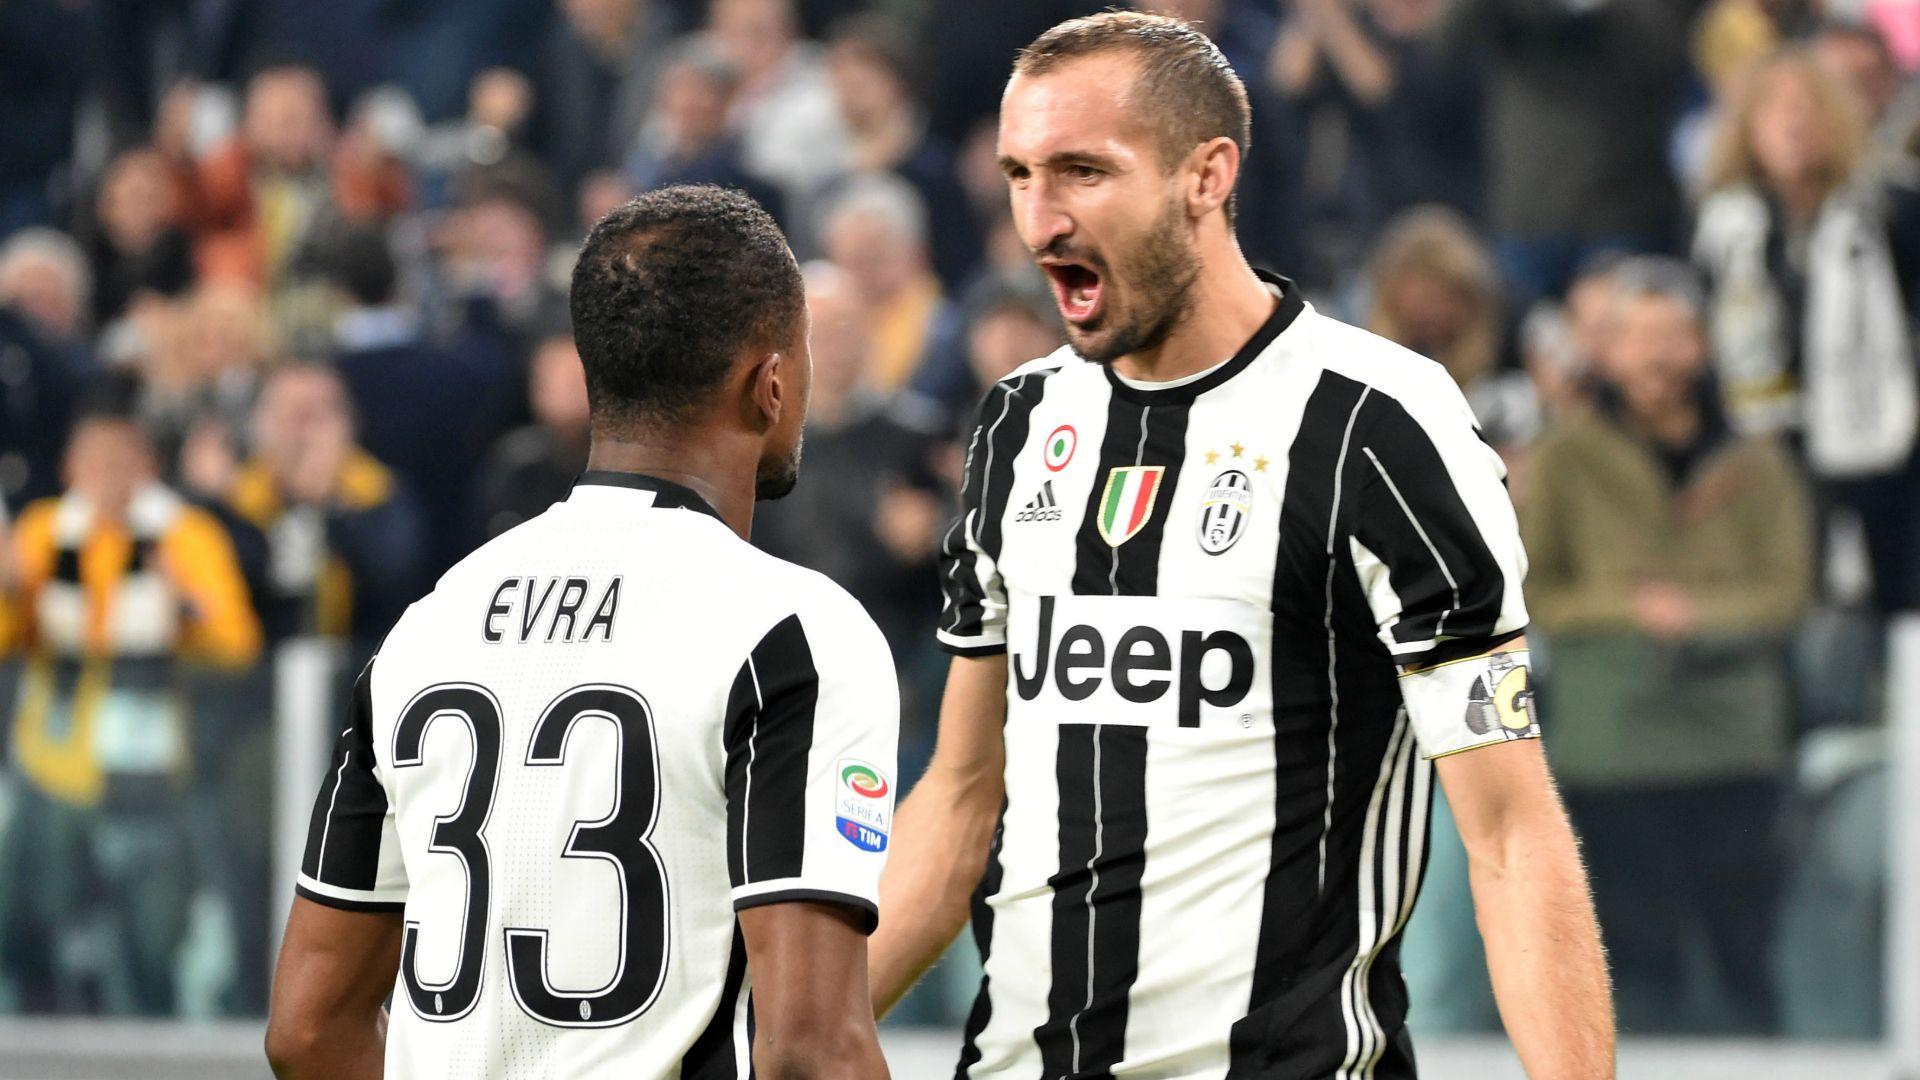 Serie A: Chiellini eyes legendary status with Juventus